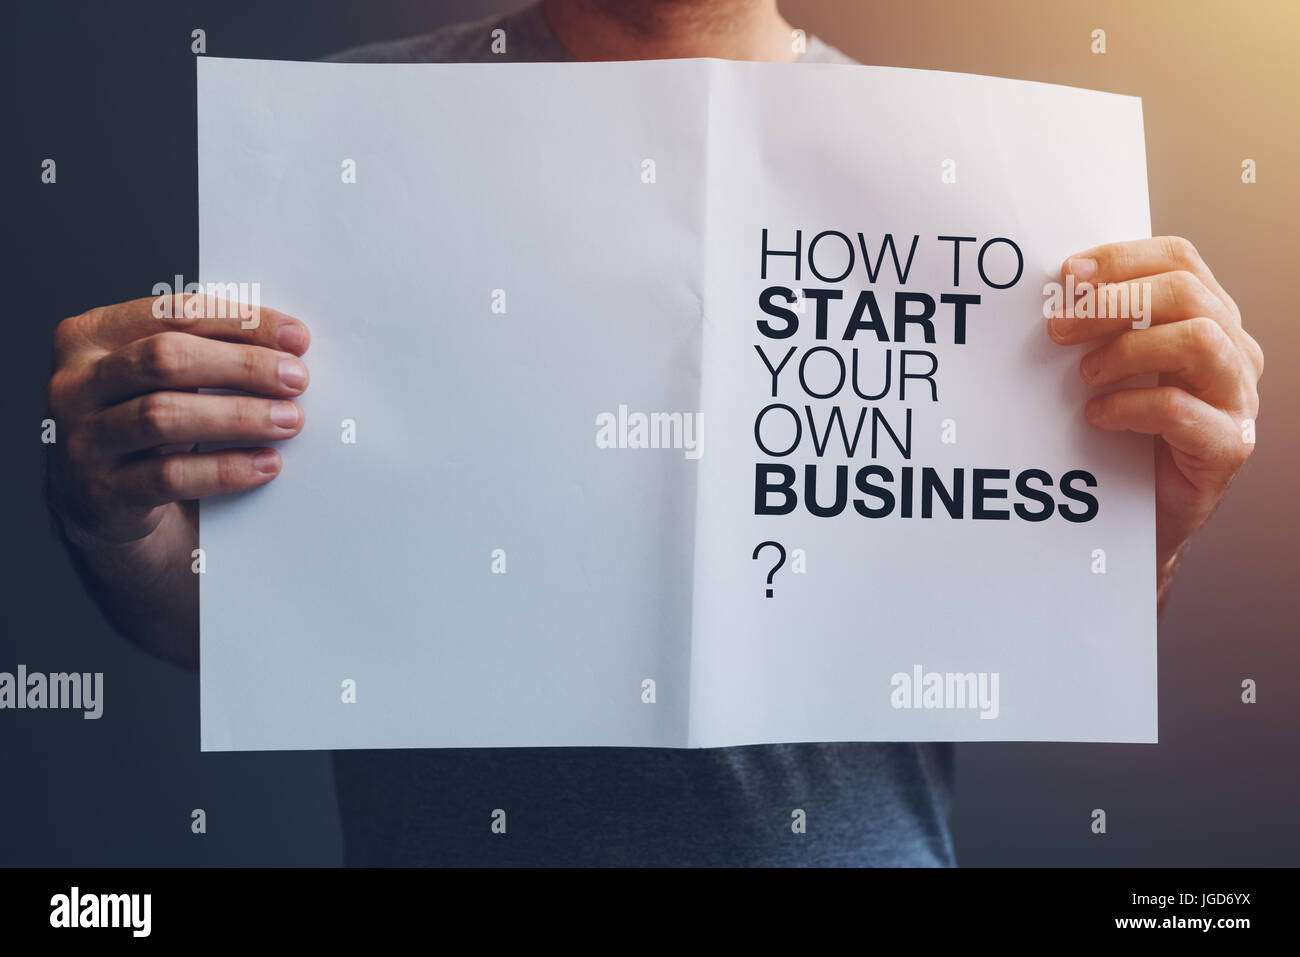 How to start your own business guide in male hands Stock Photo